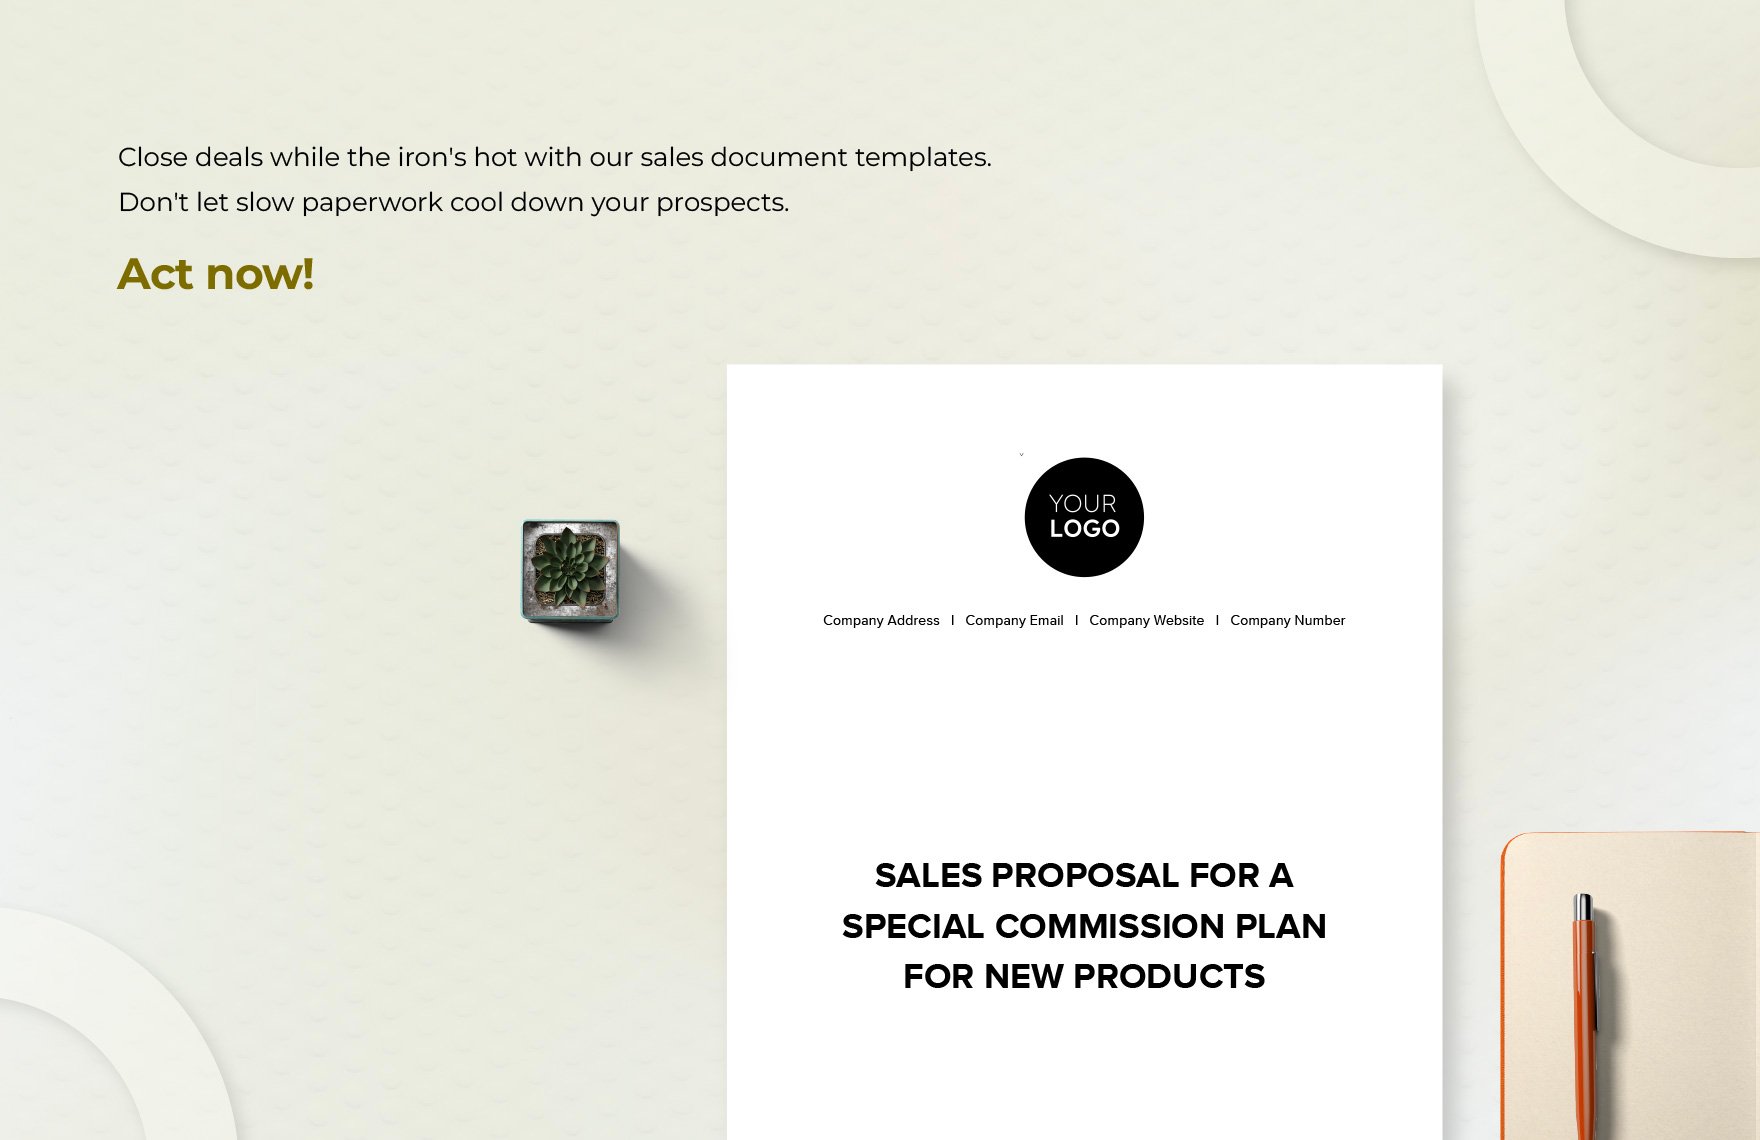 Sales Proposal for a Special Commission Plan for New Products Template